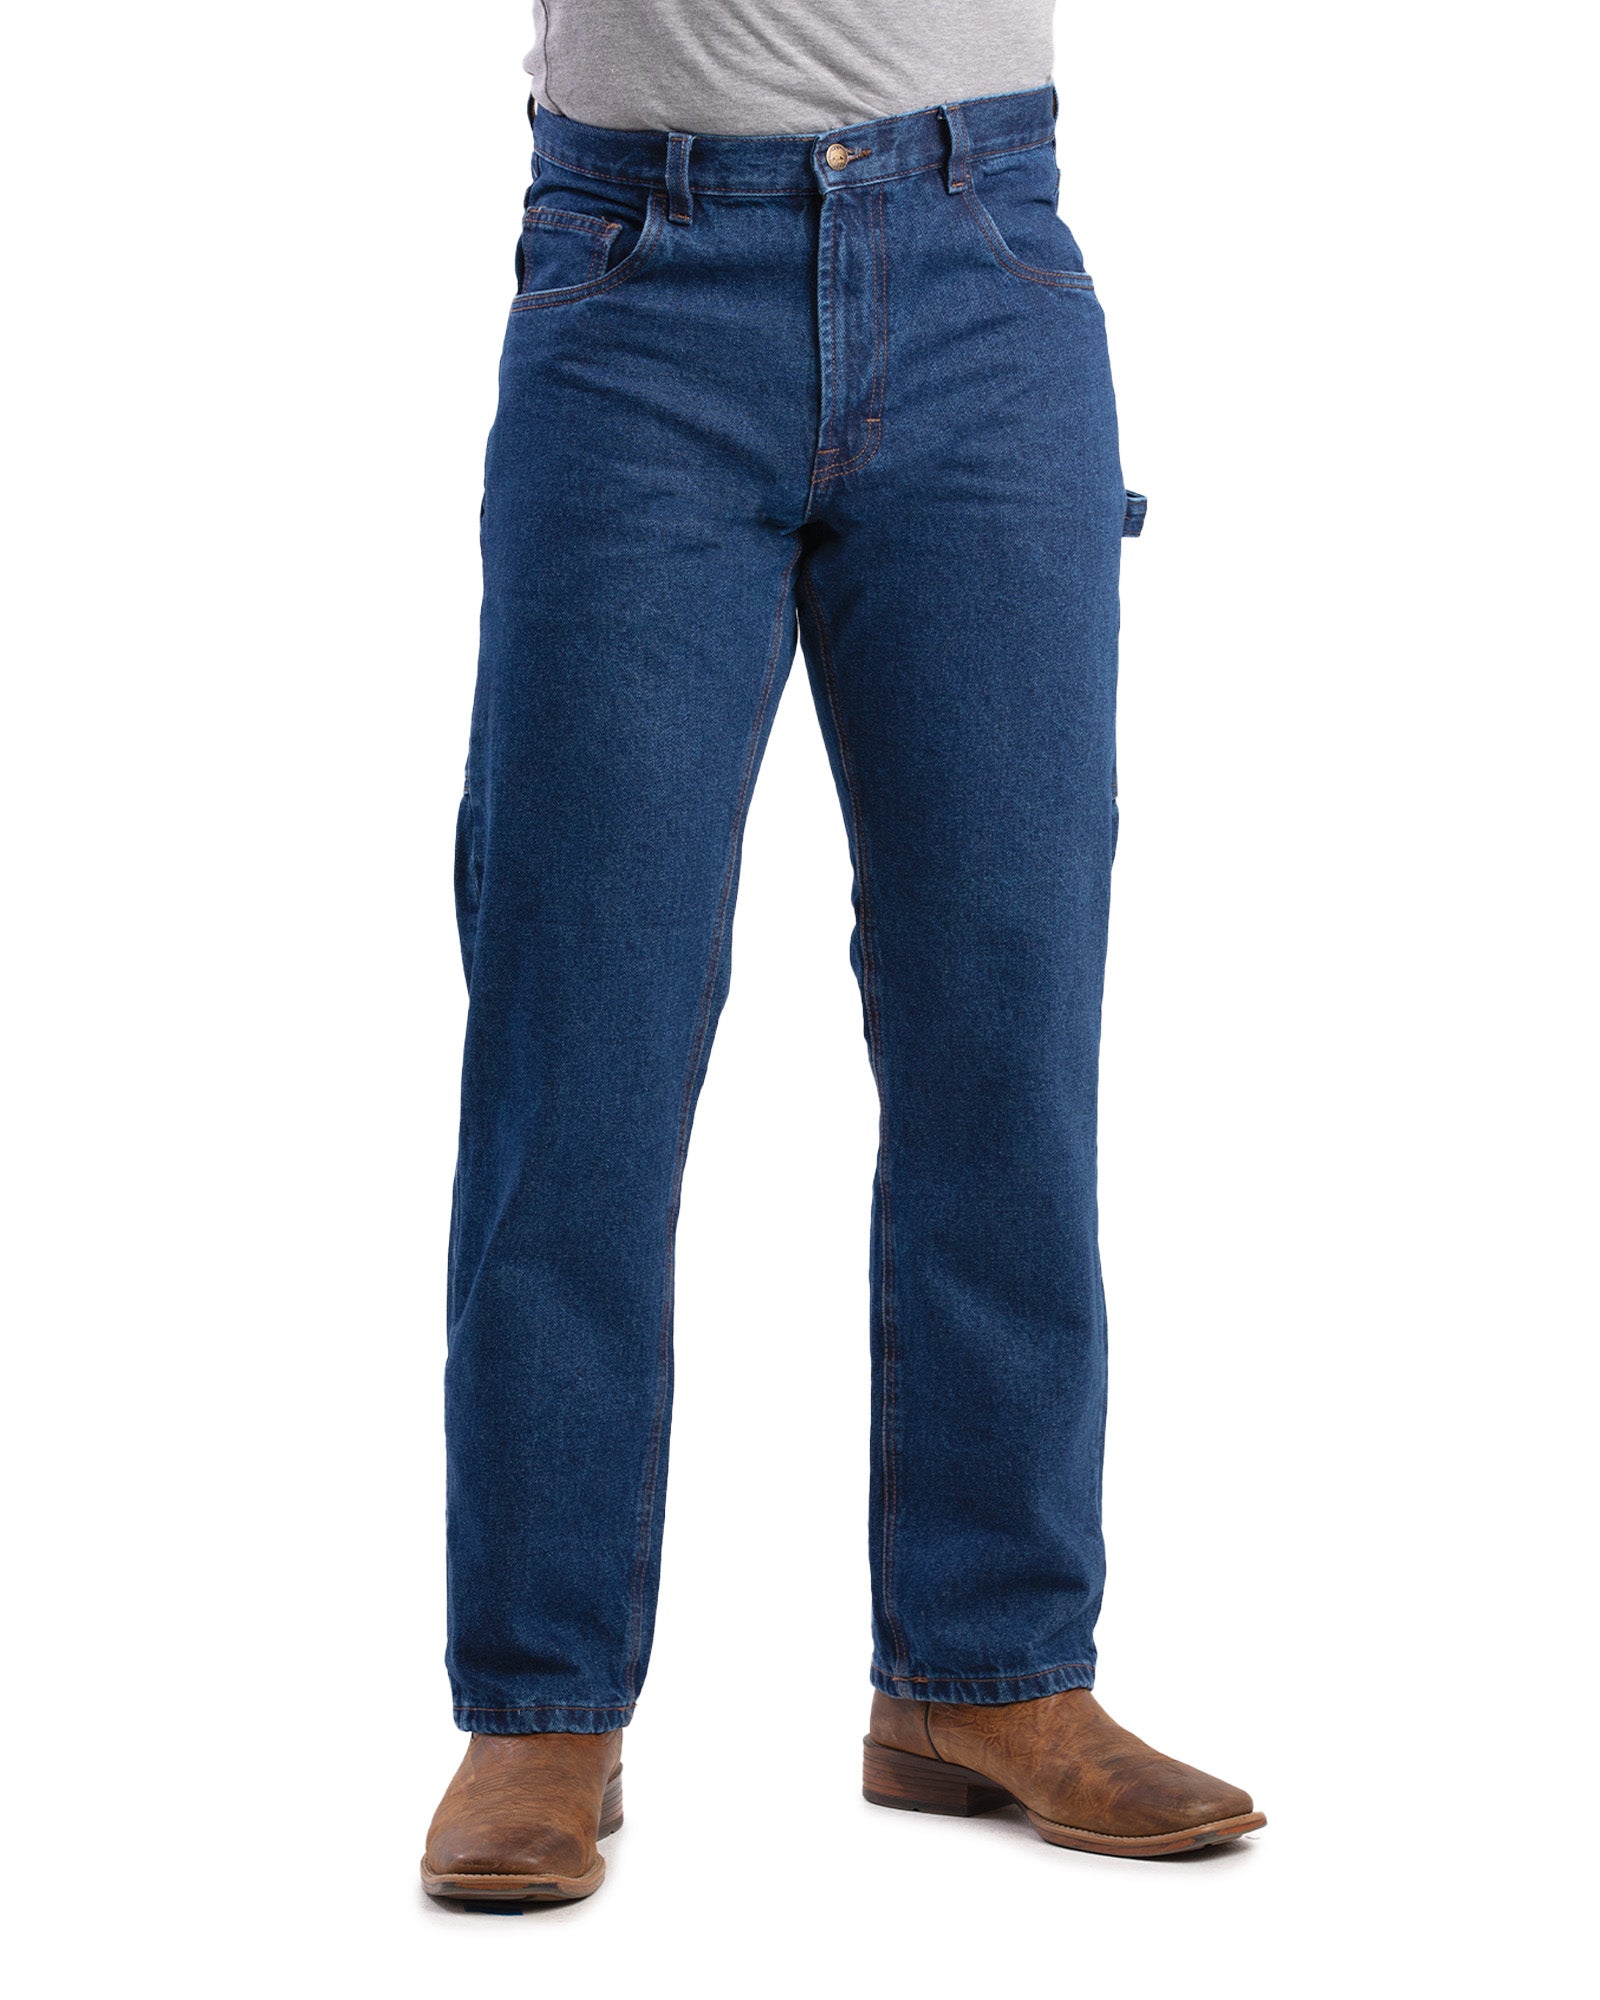 Men's Stone Wash Relaxed Fit Carpenter Jean